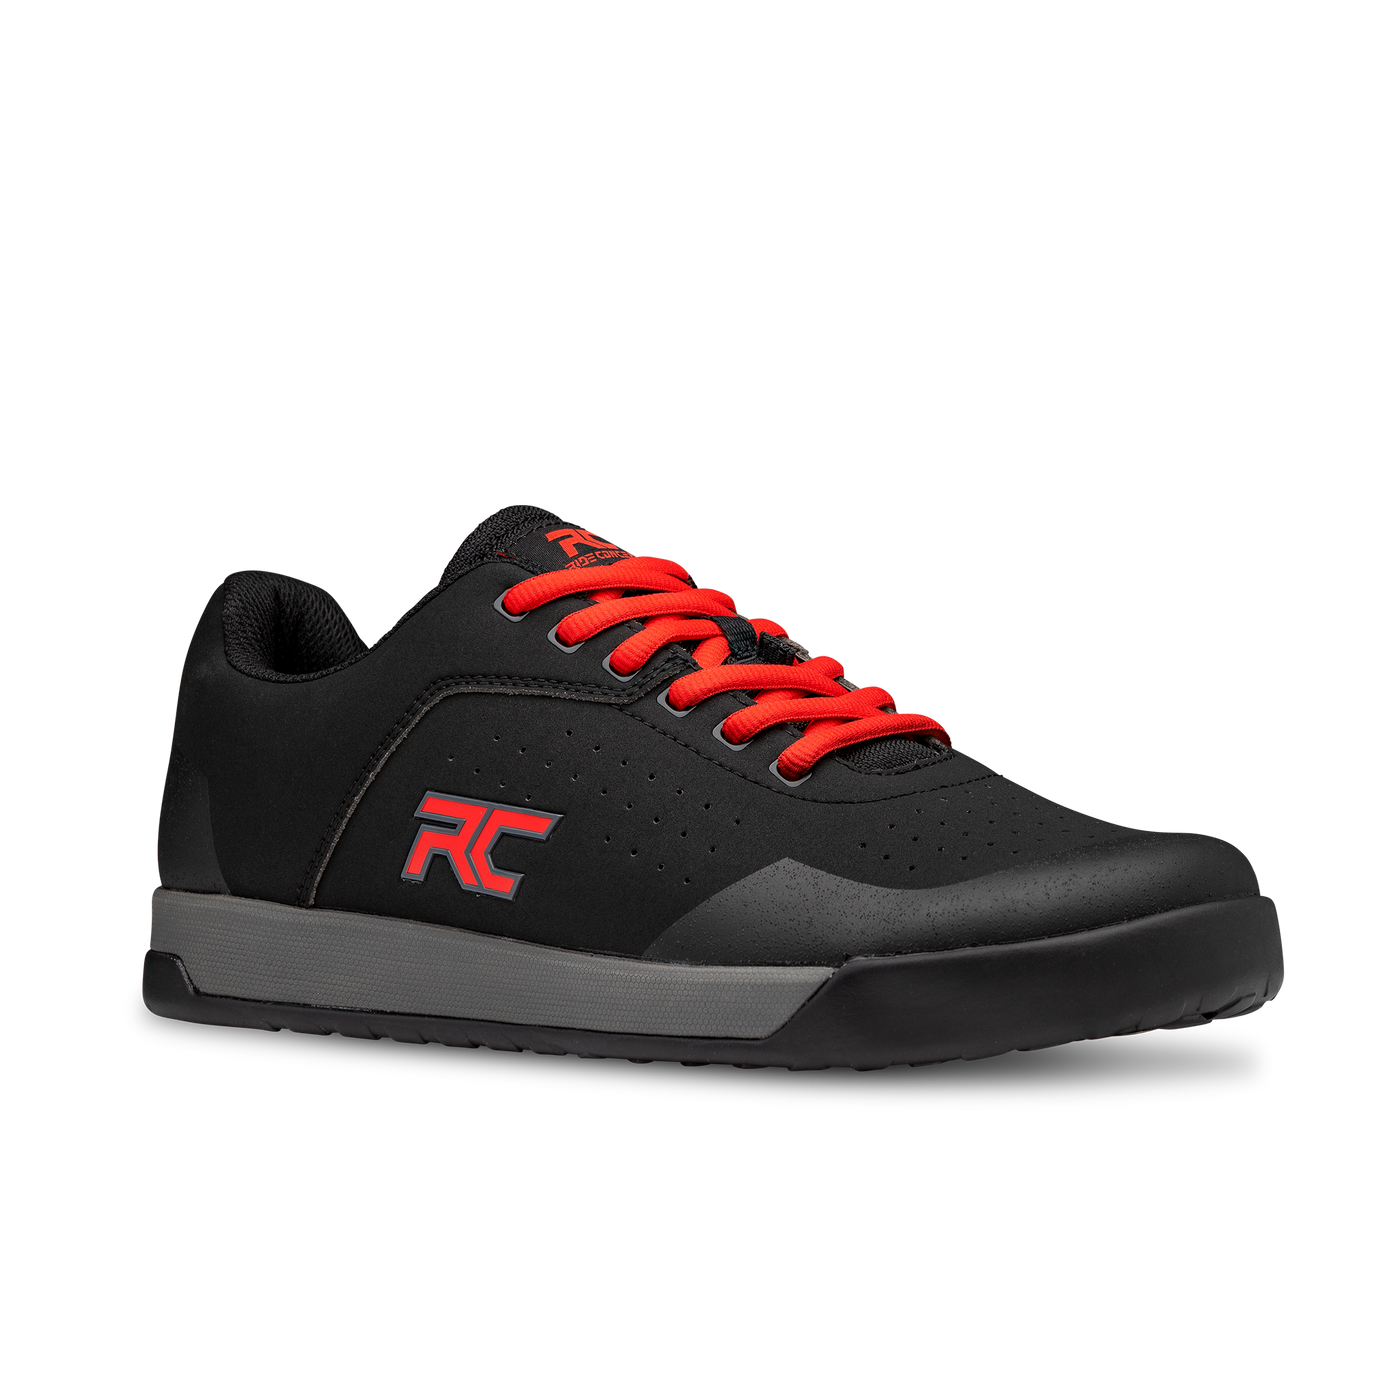 Ride Concepts Men's Hellion MTB Shoe - Black and Red